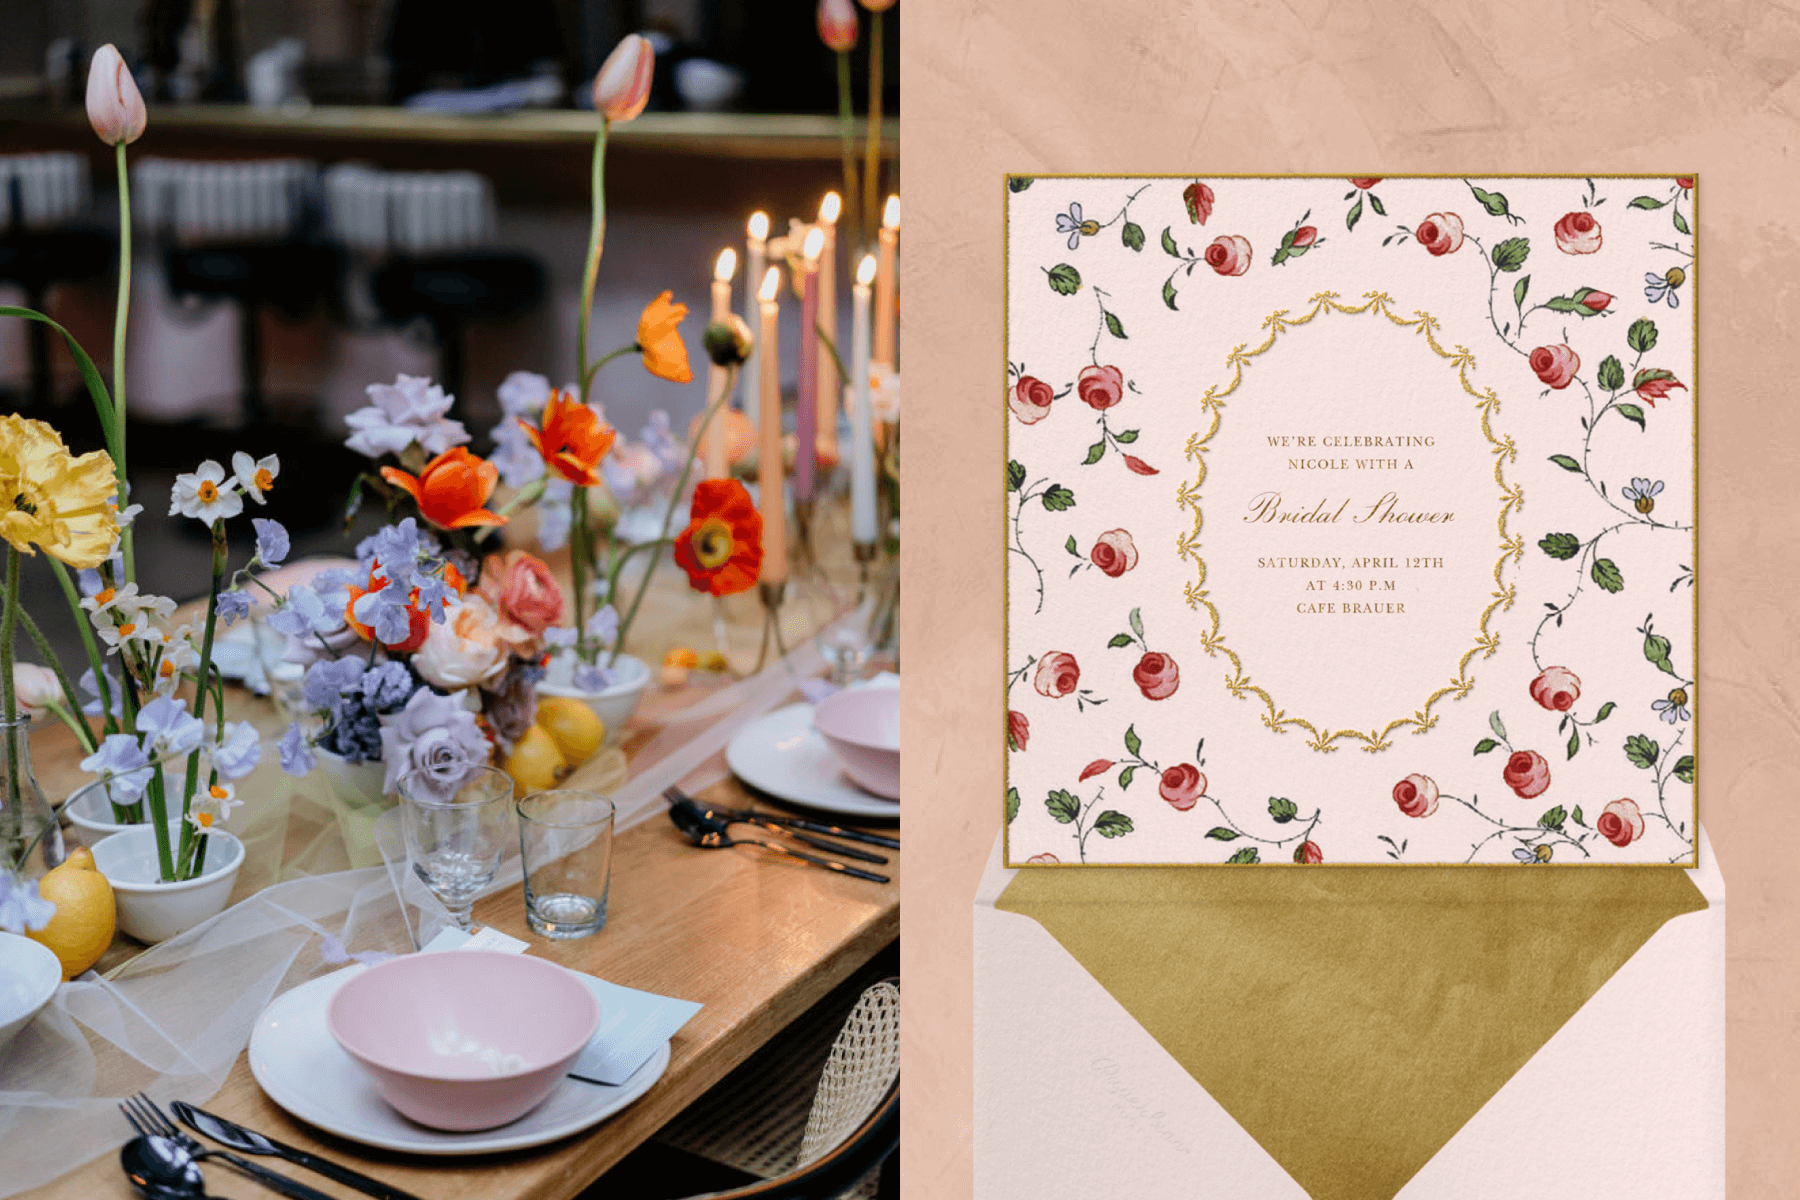 left: A tablescape with colorful spring flowers along the center, pastel taper candles, and pink place settings. Right: A square bridal shower invitation with a light pink background and small roses illustrated around a gold swag oval.